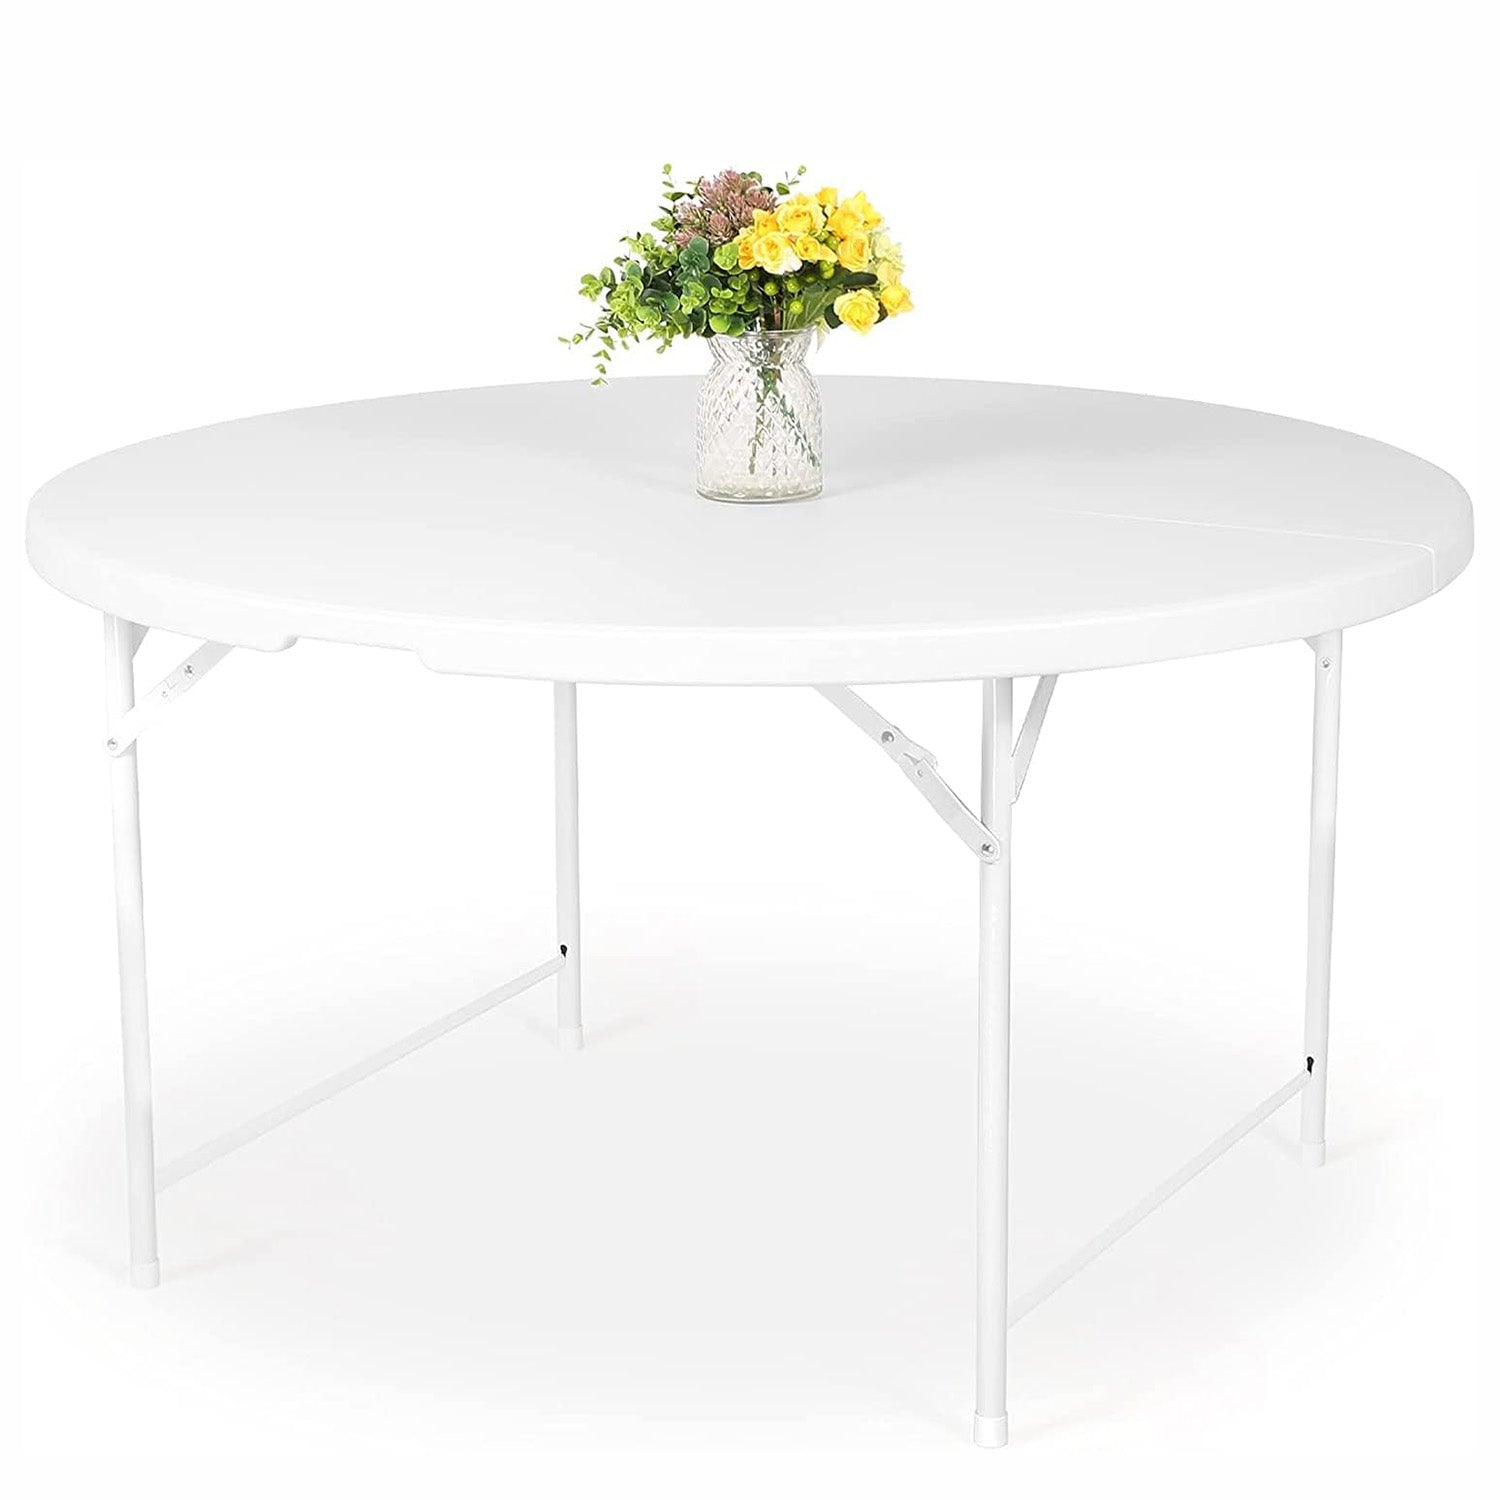 53" Diameter Round Folding Table Portable Plastic Dining Card Table for 6-8, White